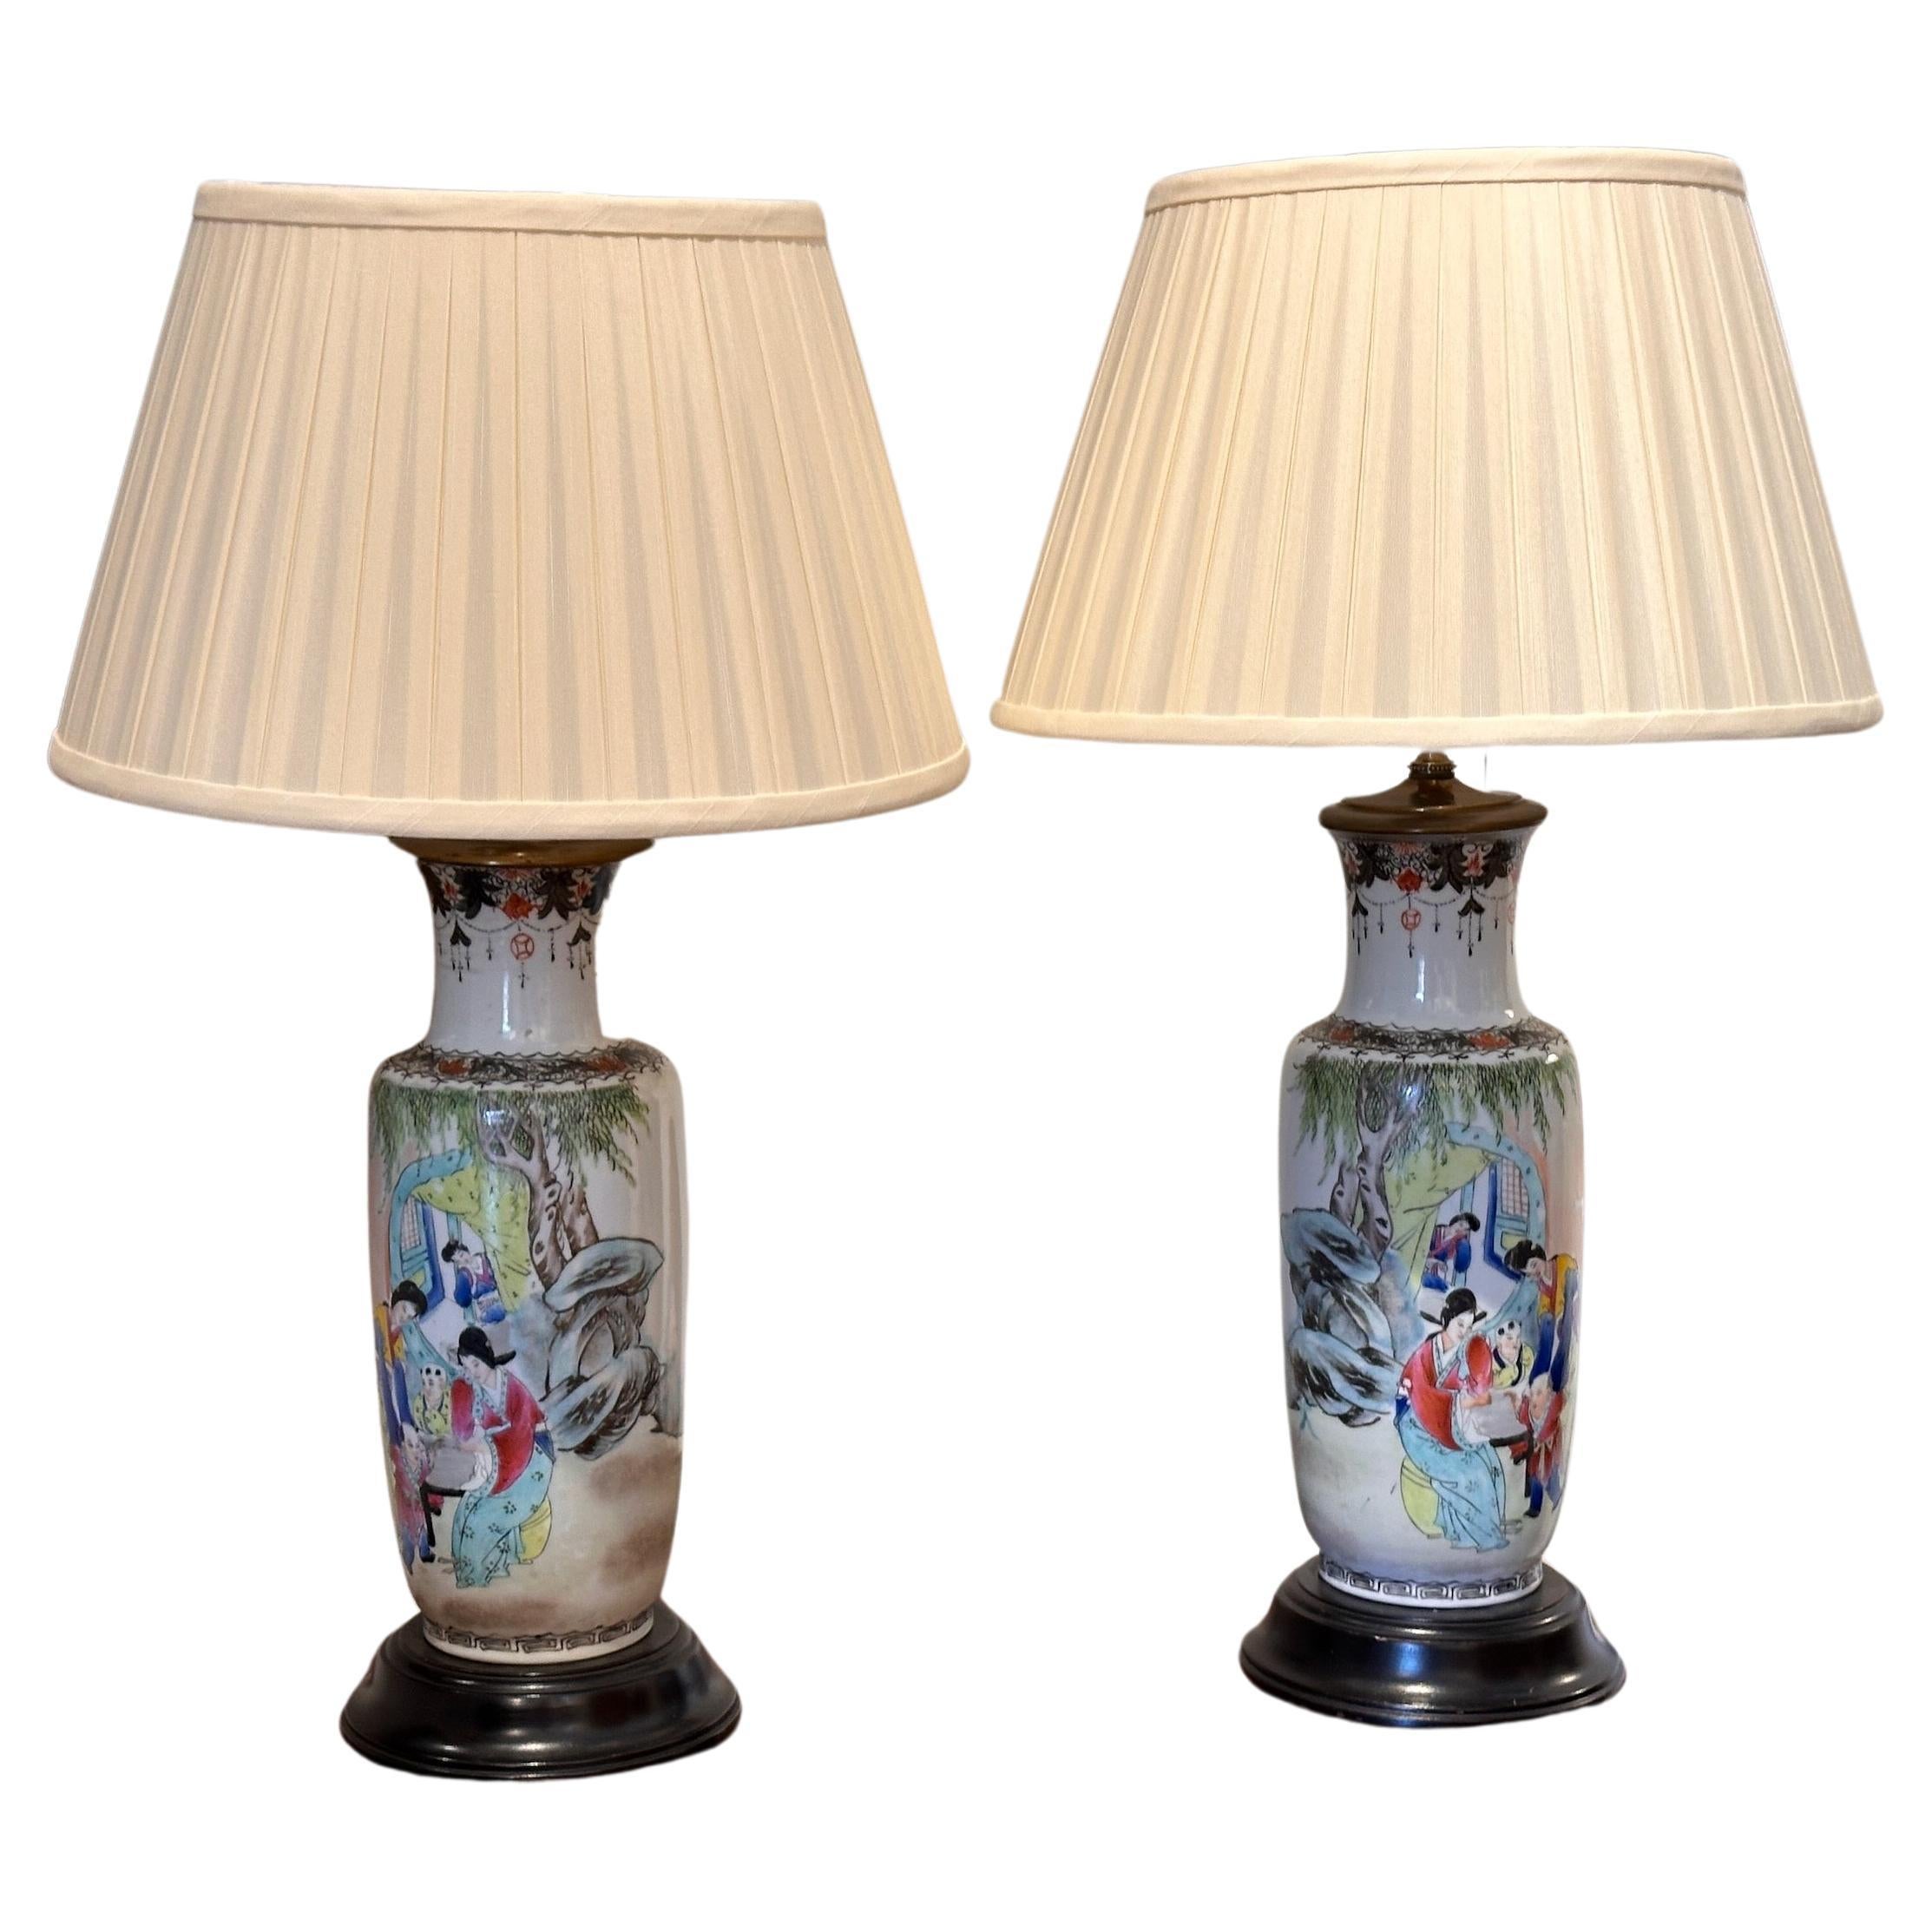 1920s Chinese Urn Lamps - a Pair For Sale